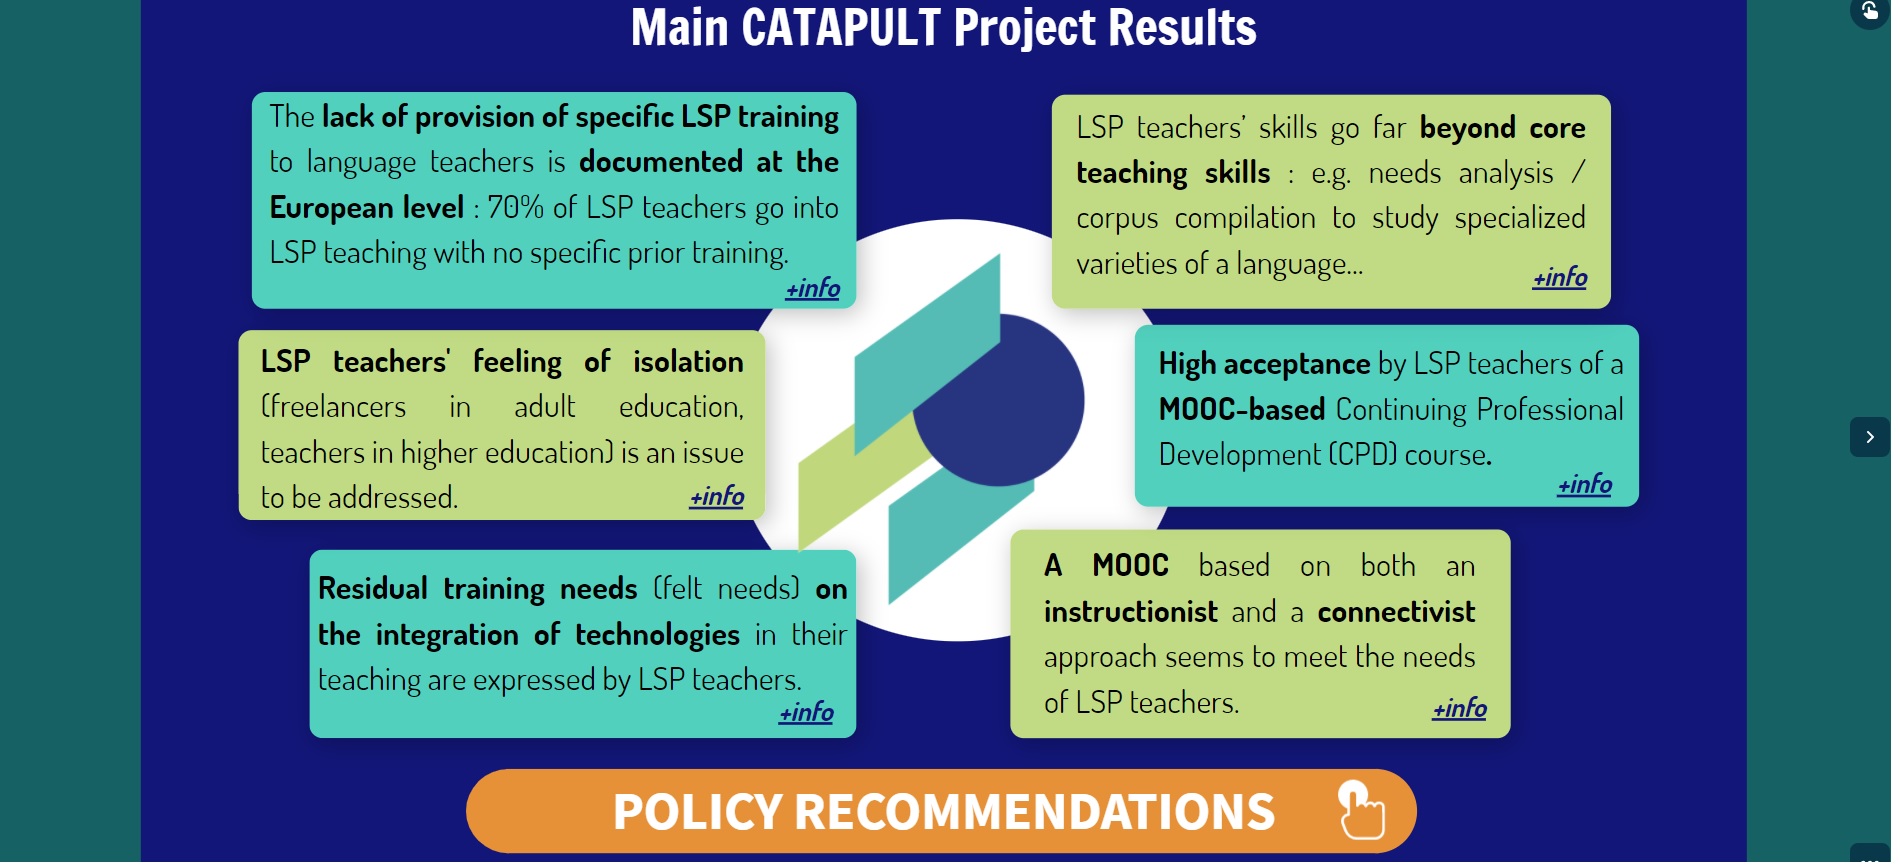 CATAPULT’s main Project Results and Policy Recommendations at a glance